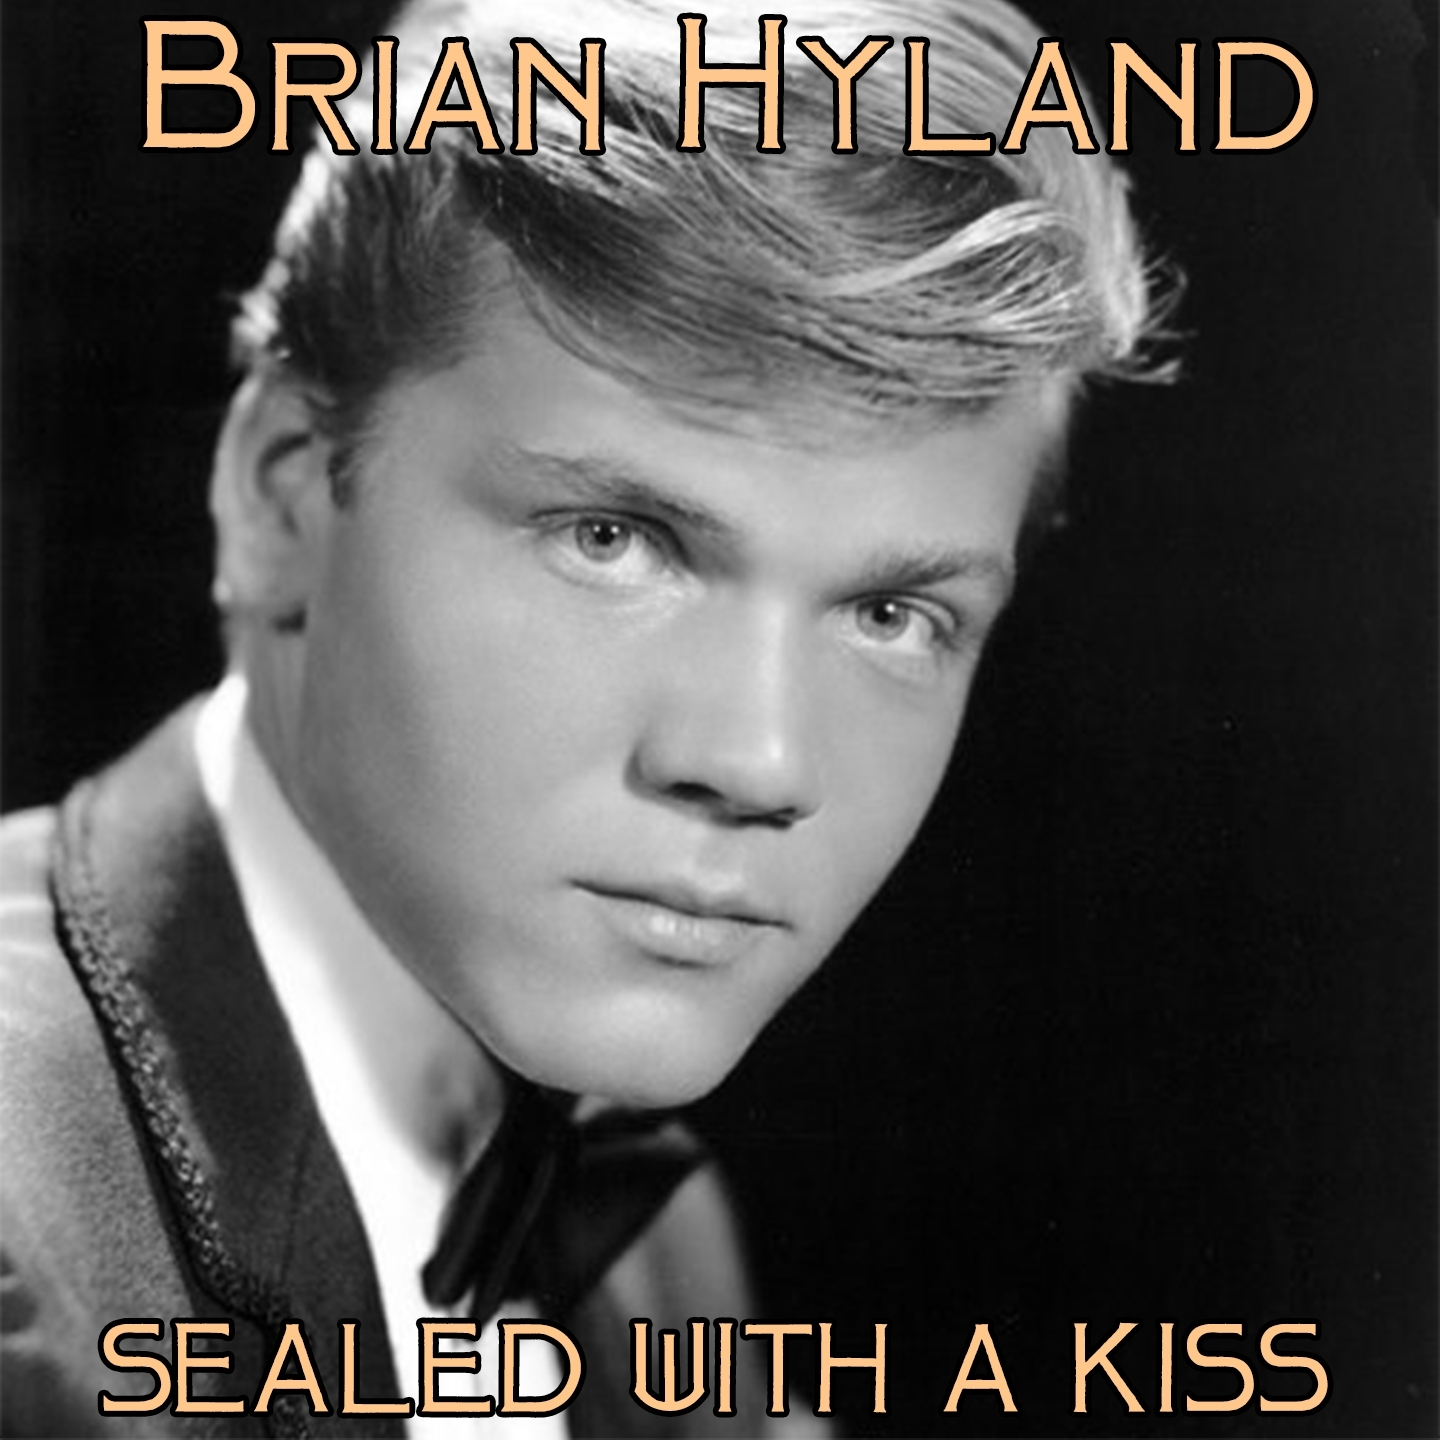 Sealed With A Kiss (Brian Hyland) - GetSongBPM